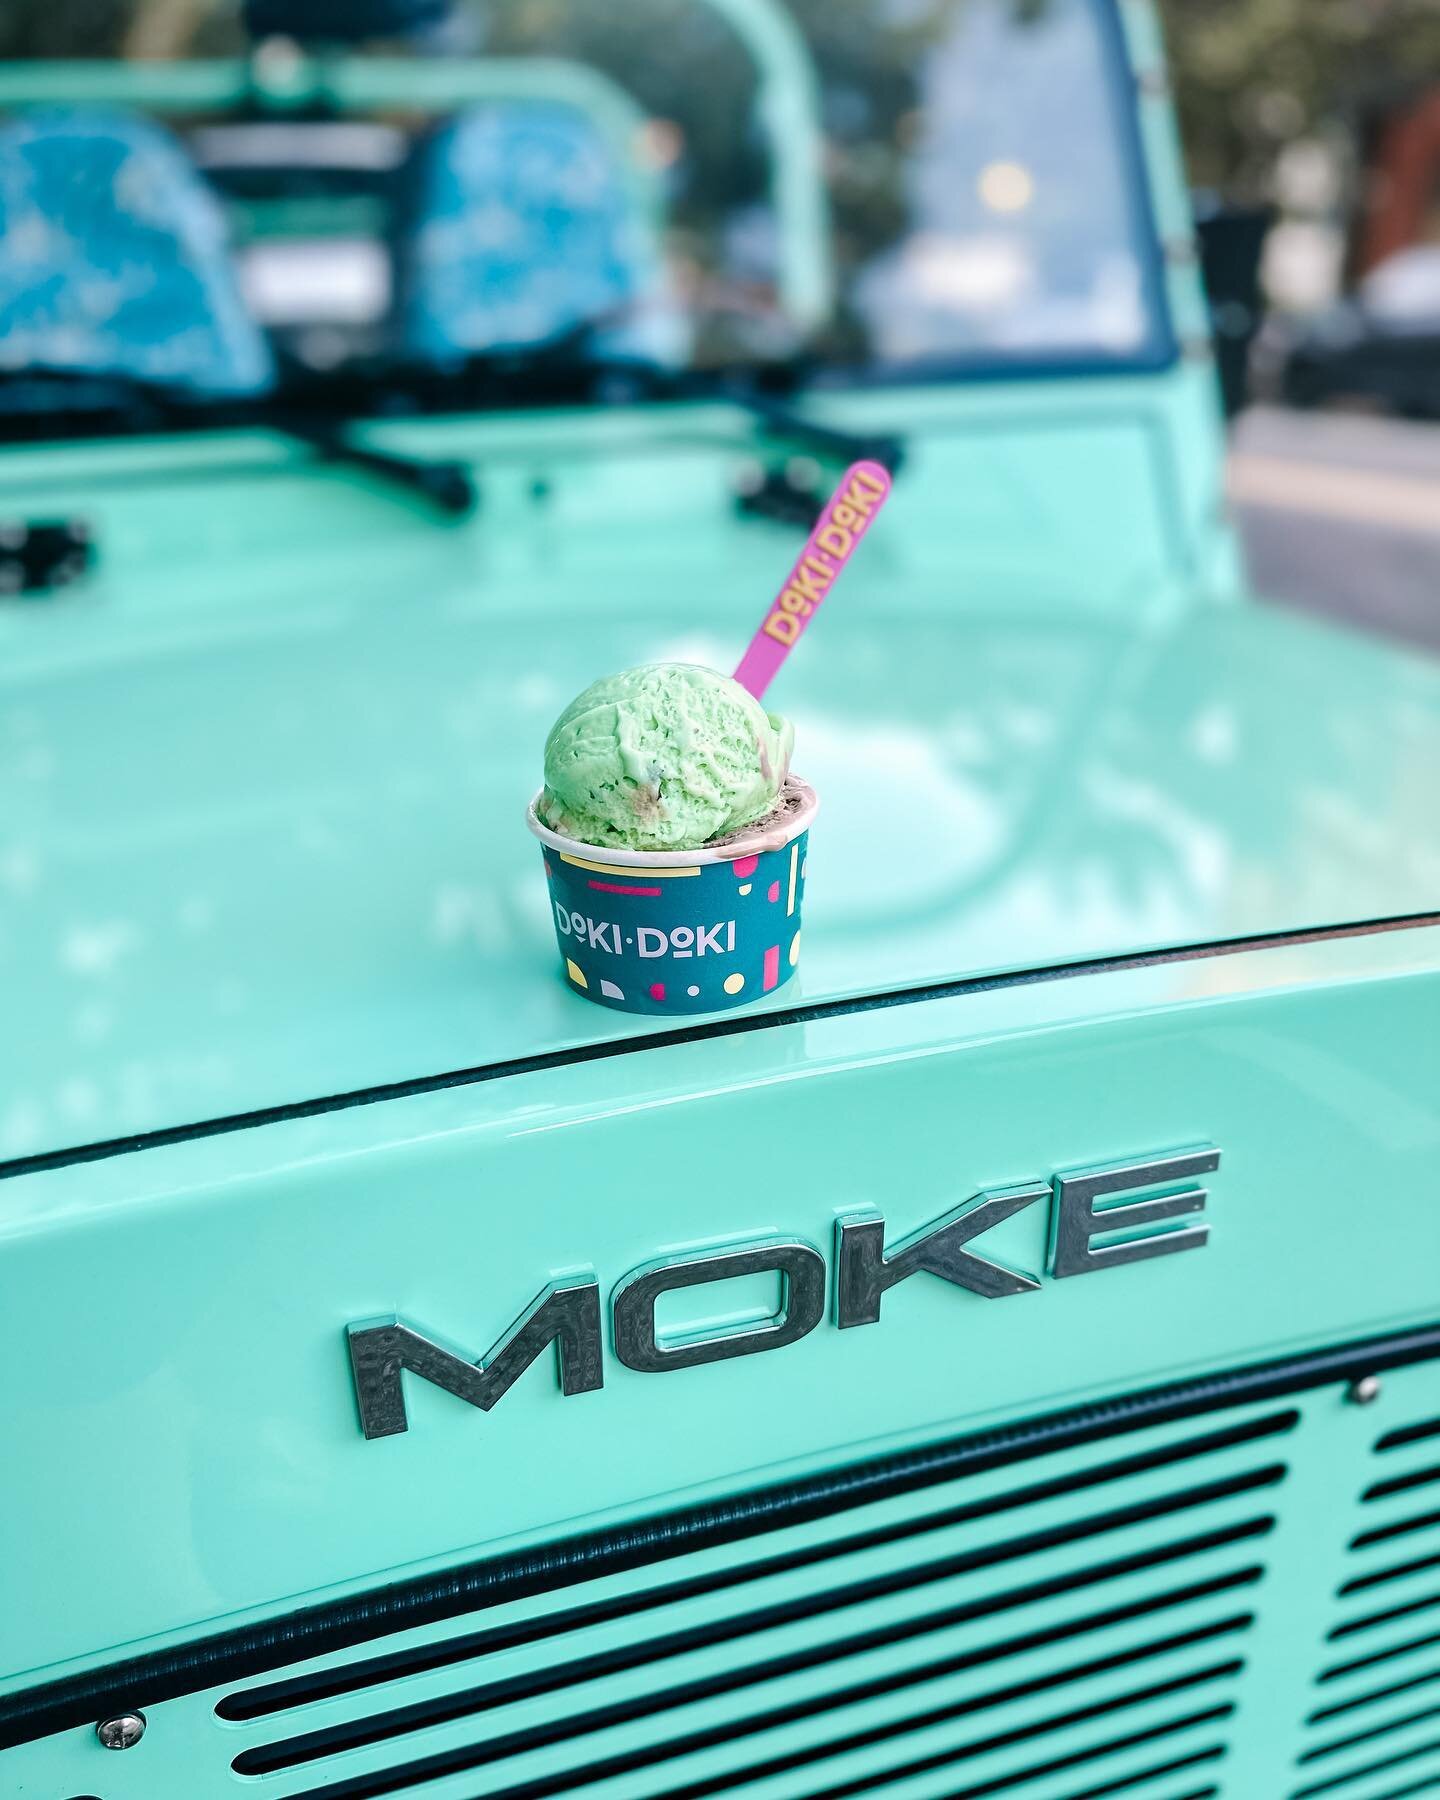 &ldquo;Moke&rsquo;d&rdquo; our way over to @dokidokiicecreamery for a scoop of mint! 🍨 Book the minty Moke for a  perfect summer night ice cream adventure. Link to book in bio✨ 

#savannahslowpokes #savannahmoke #mokesavannah #mokerentals #mokerenta